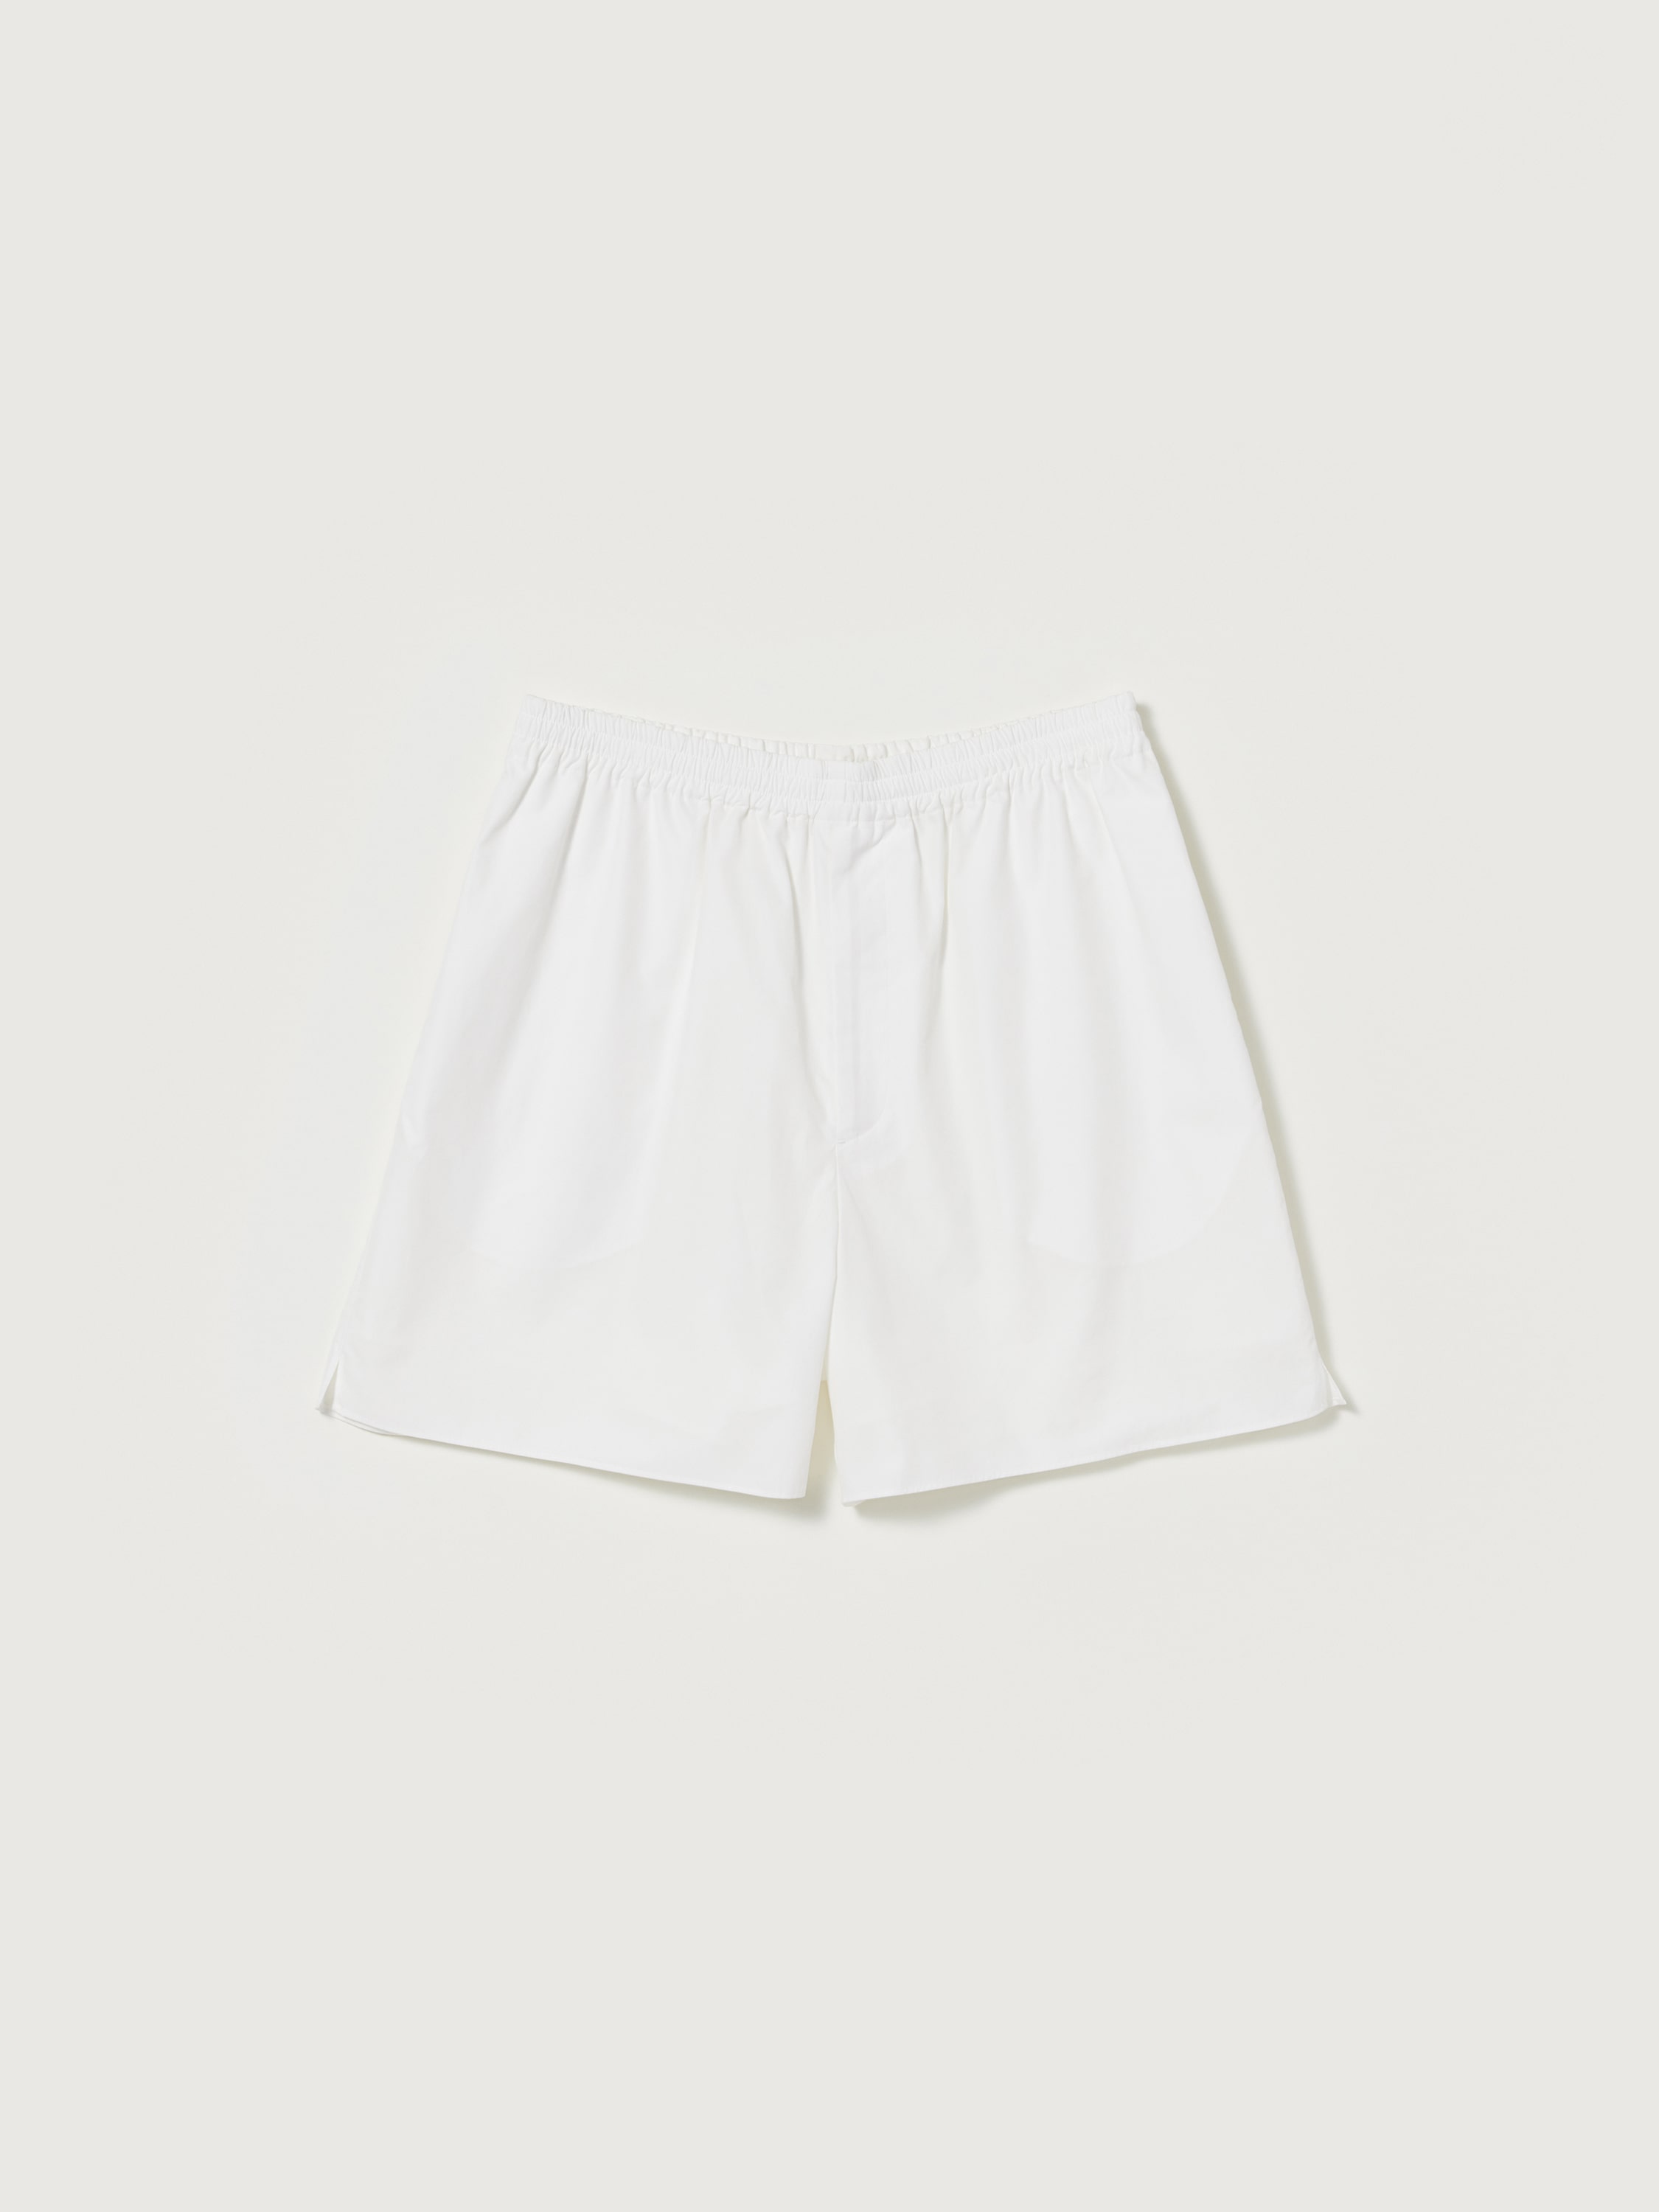 HIGH COUNT FINX OX SHORTS 詳細画像 WHITE 4